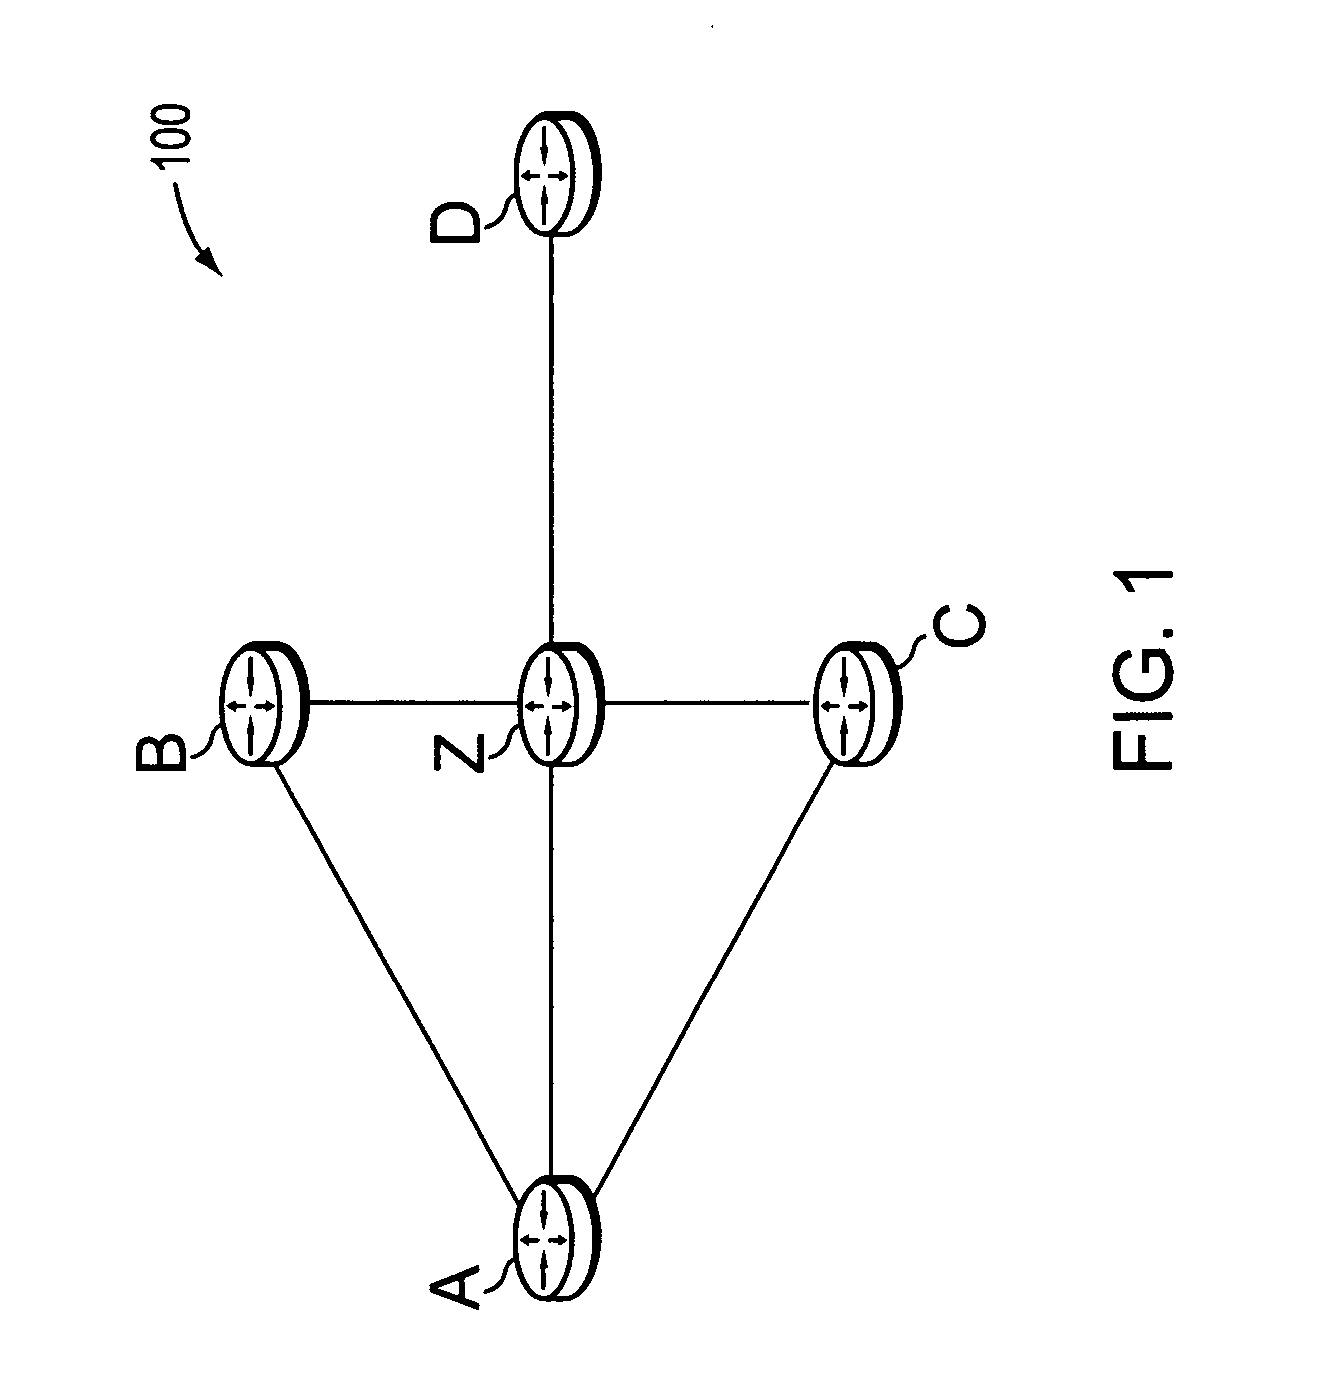 Technique for distinguishing between link and node failure using bidirectional forwarding detection (BFD)